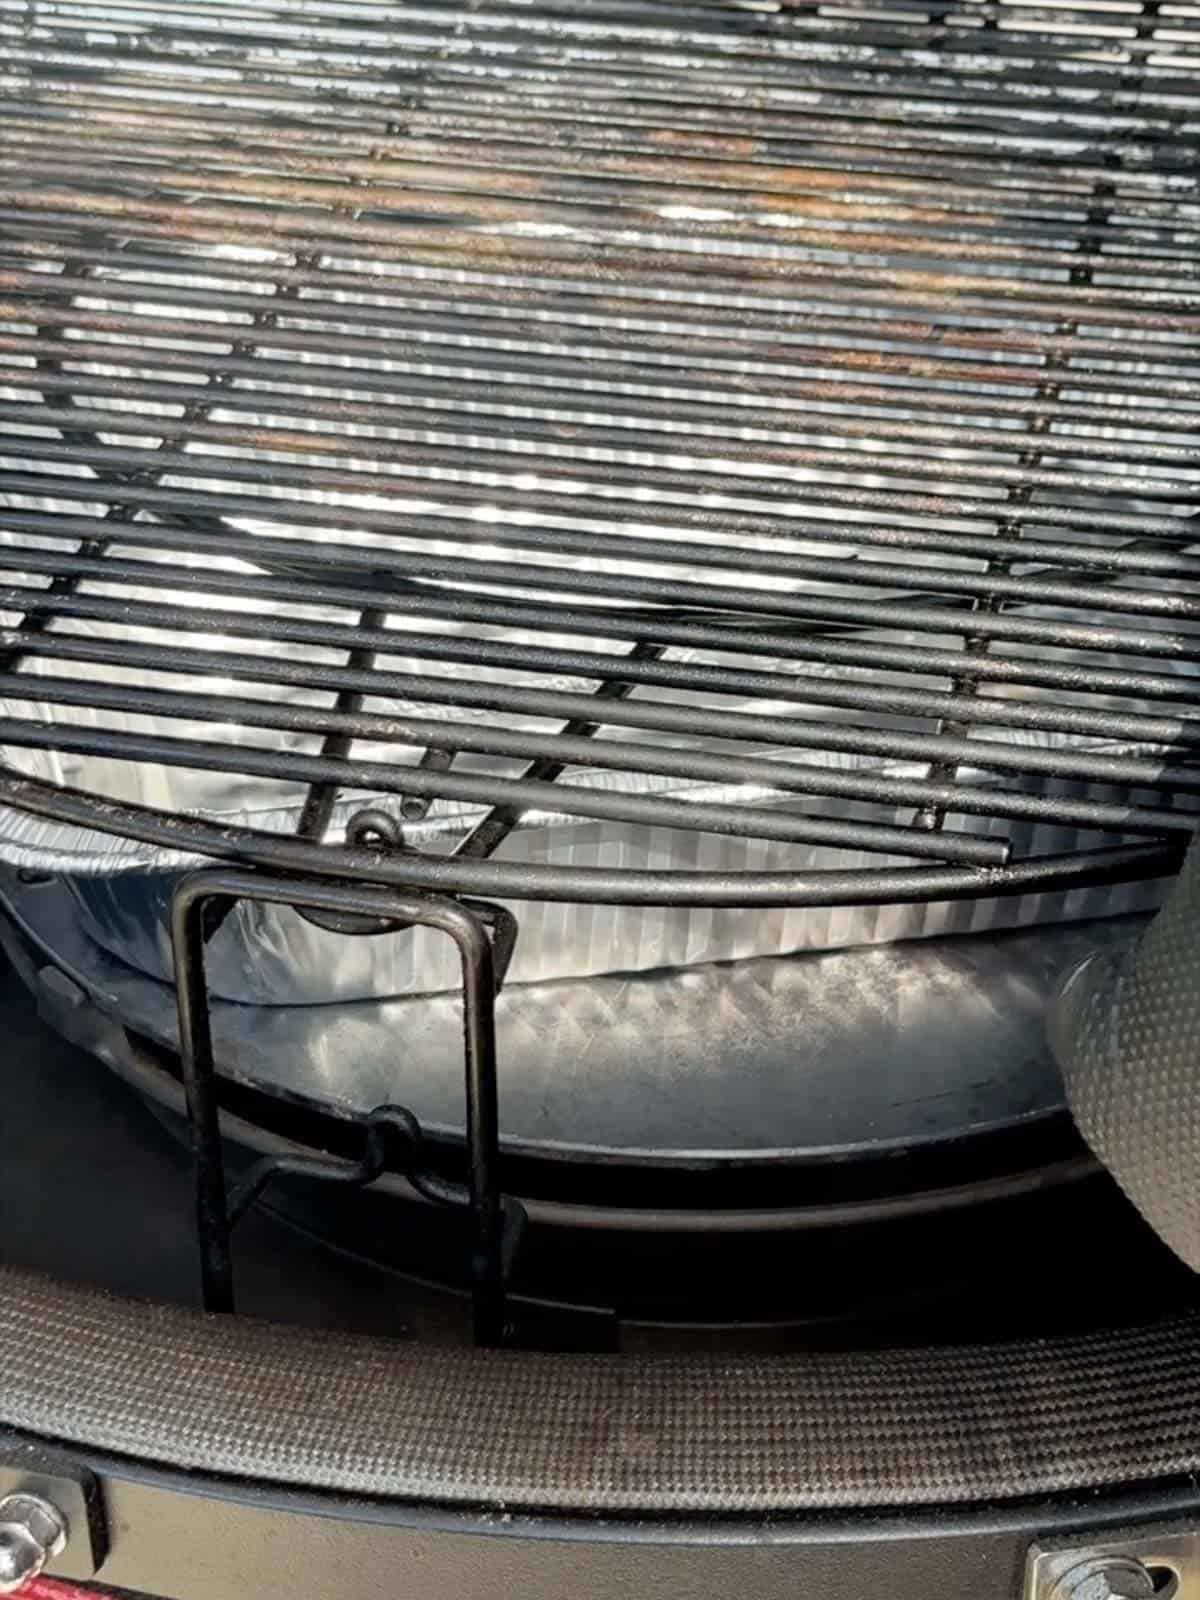 set up the grill grates with a drip pan underneath